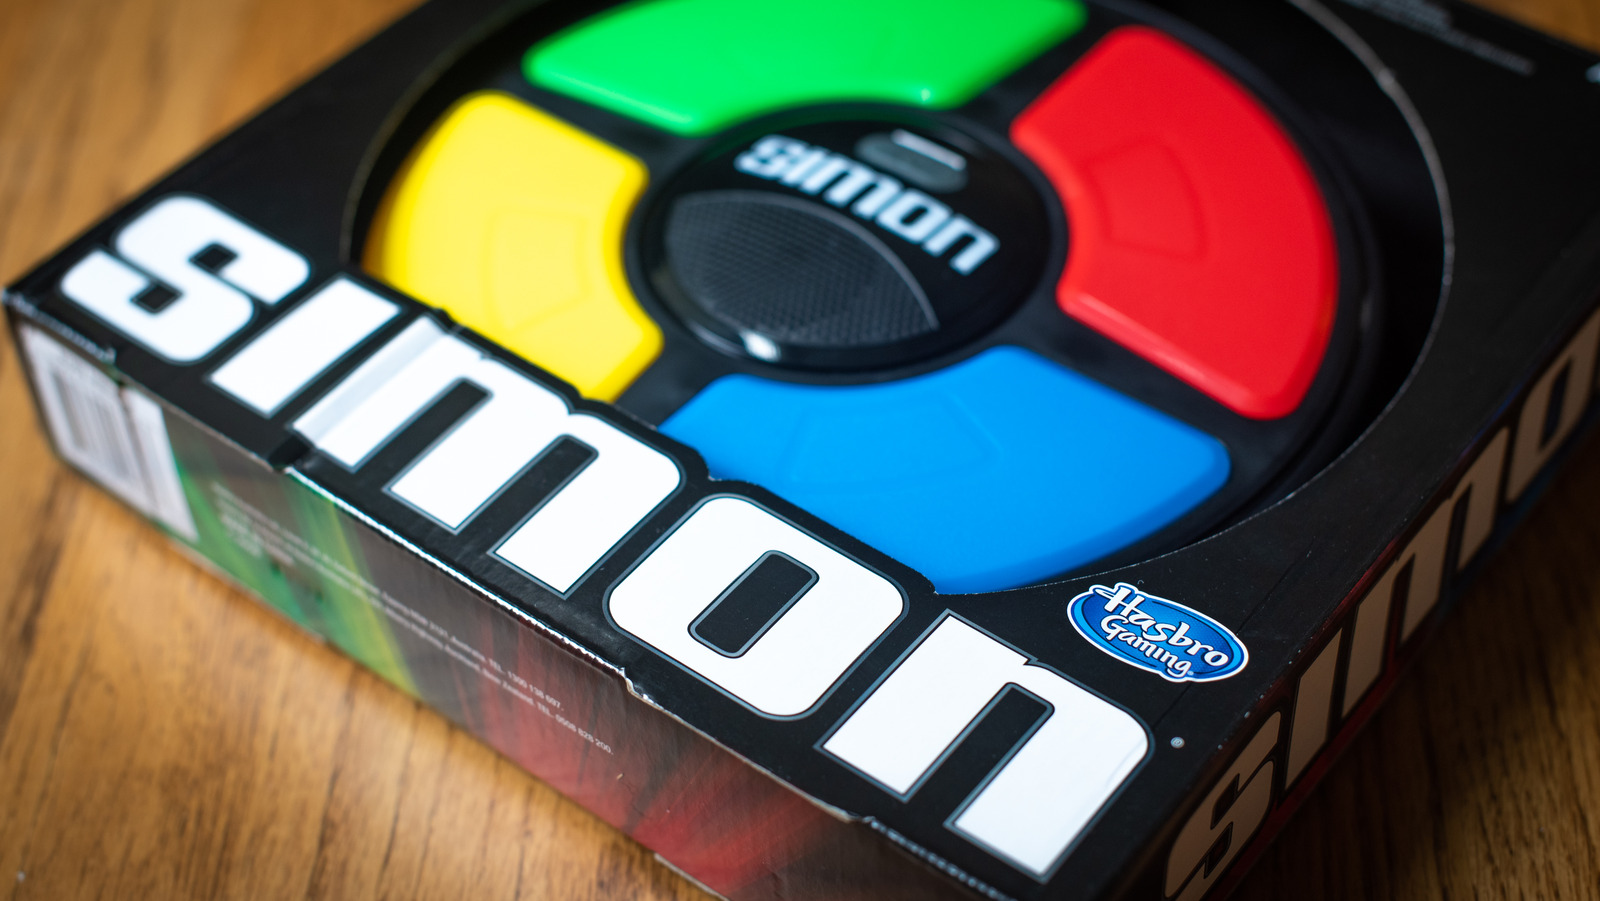 Simon Electronic Memory Game Hasbro Toy Tested Says Handheld Air Works Touch 